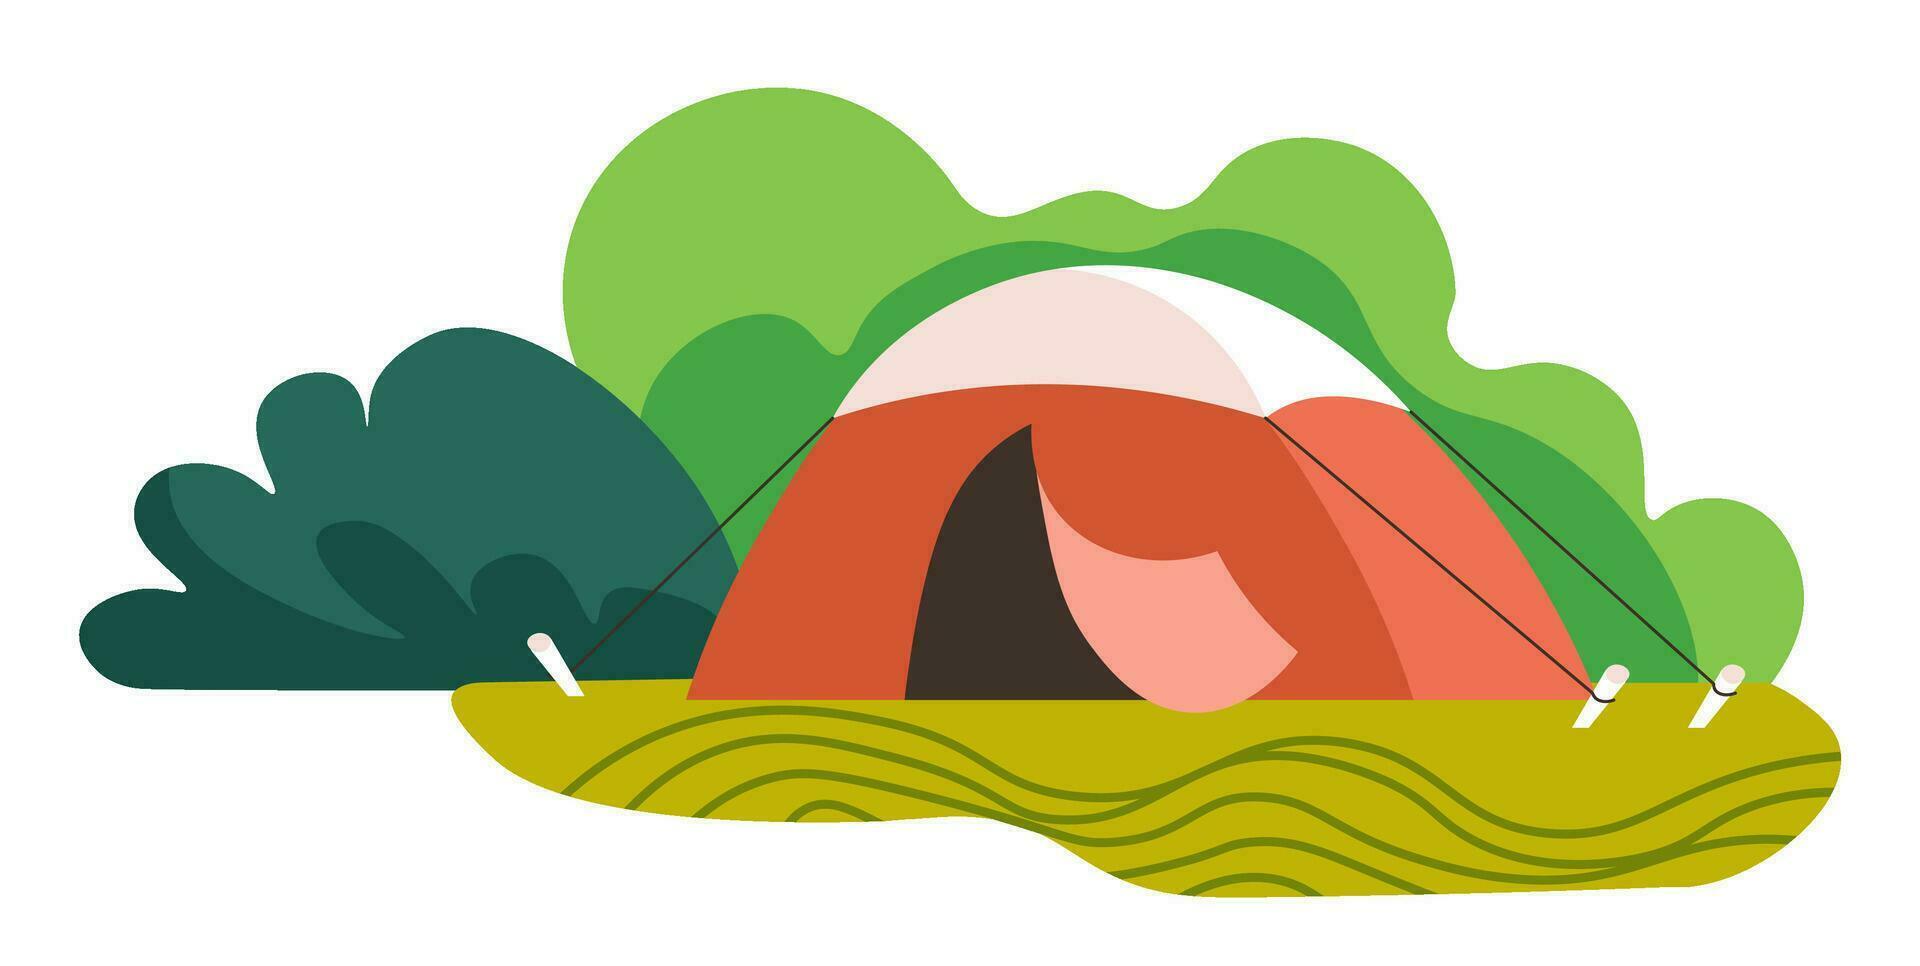 Hiking and camping, tent on campsite, new trip vector